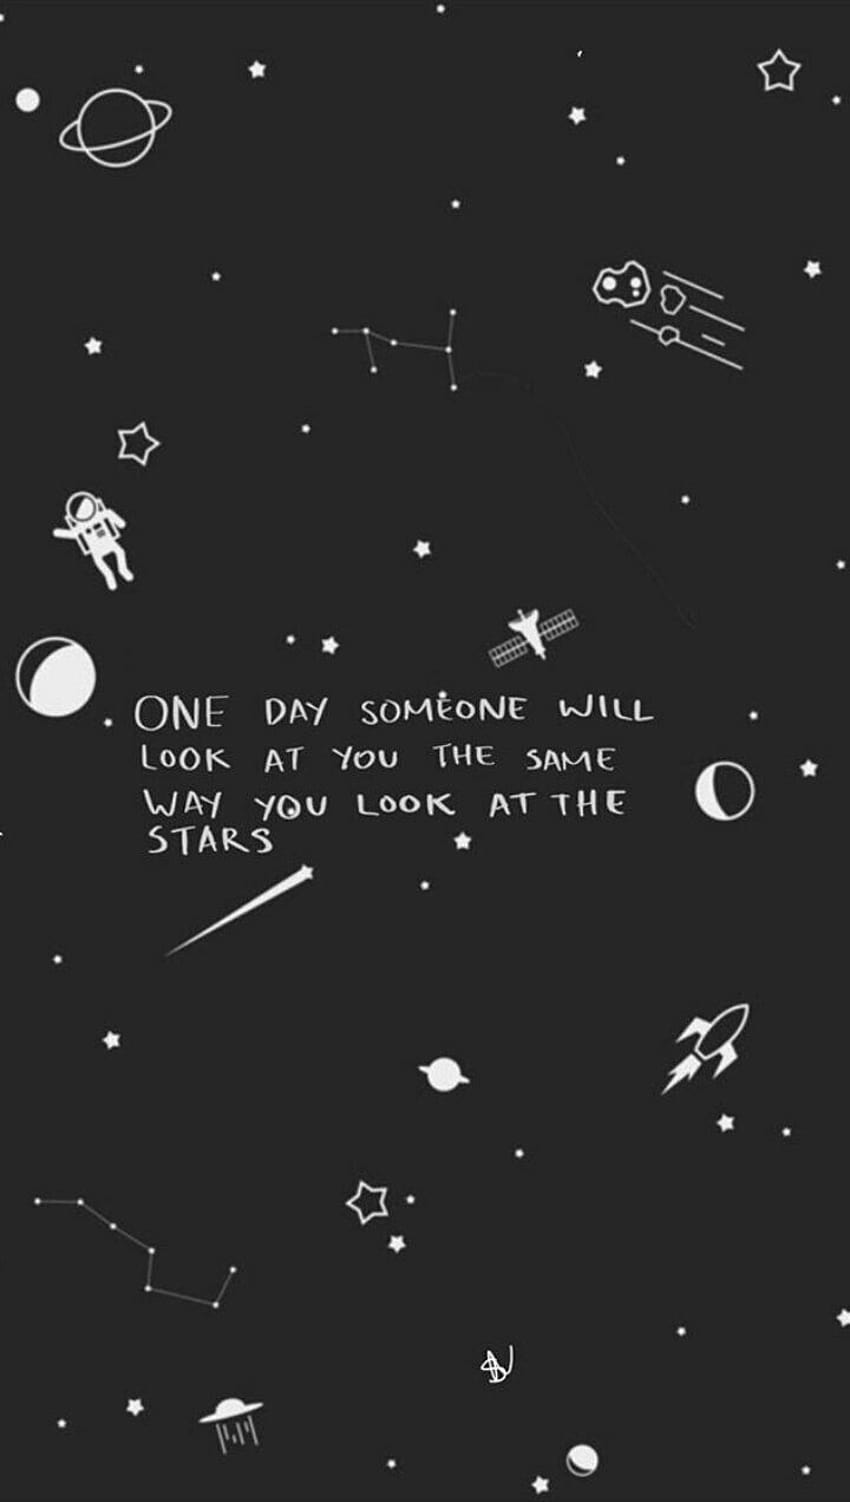 Black aesthetic wallpaper with stars, moon, and astronaut. - Space